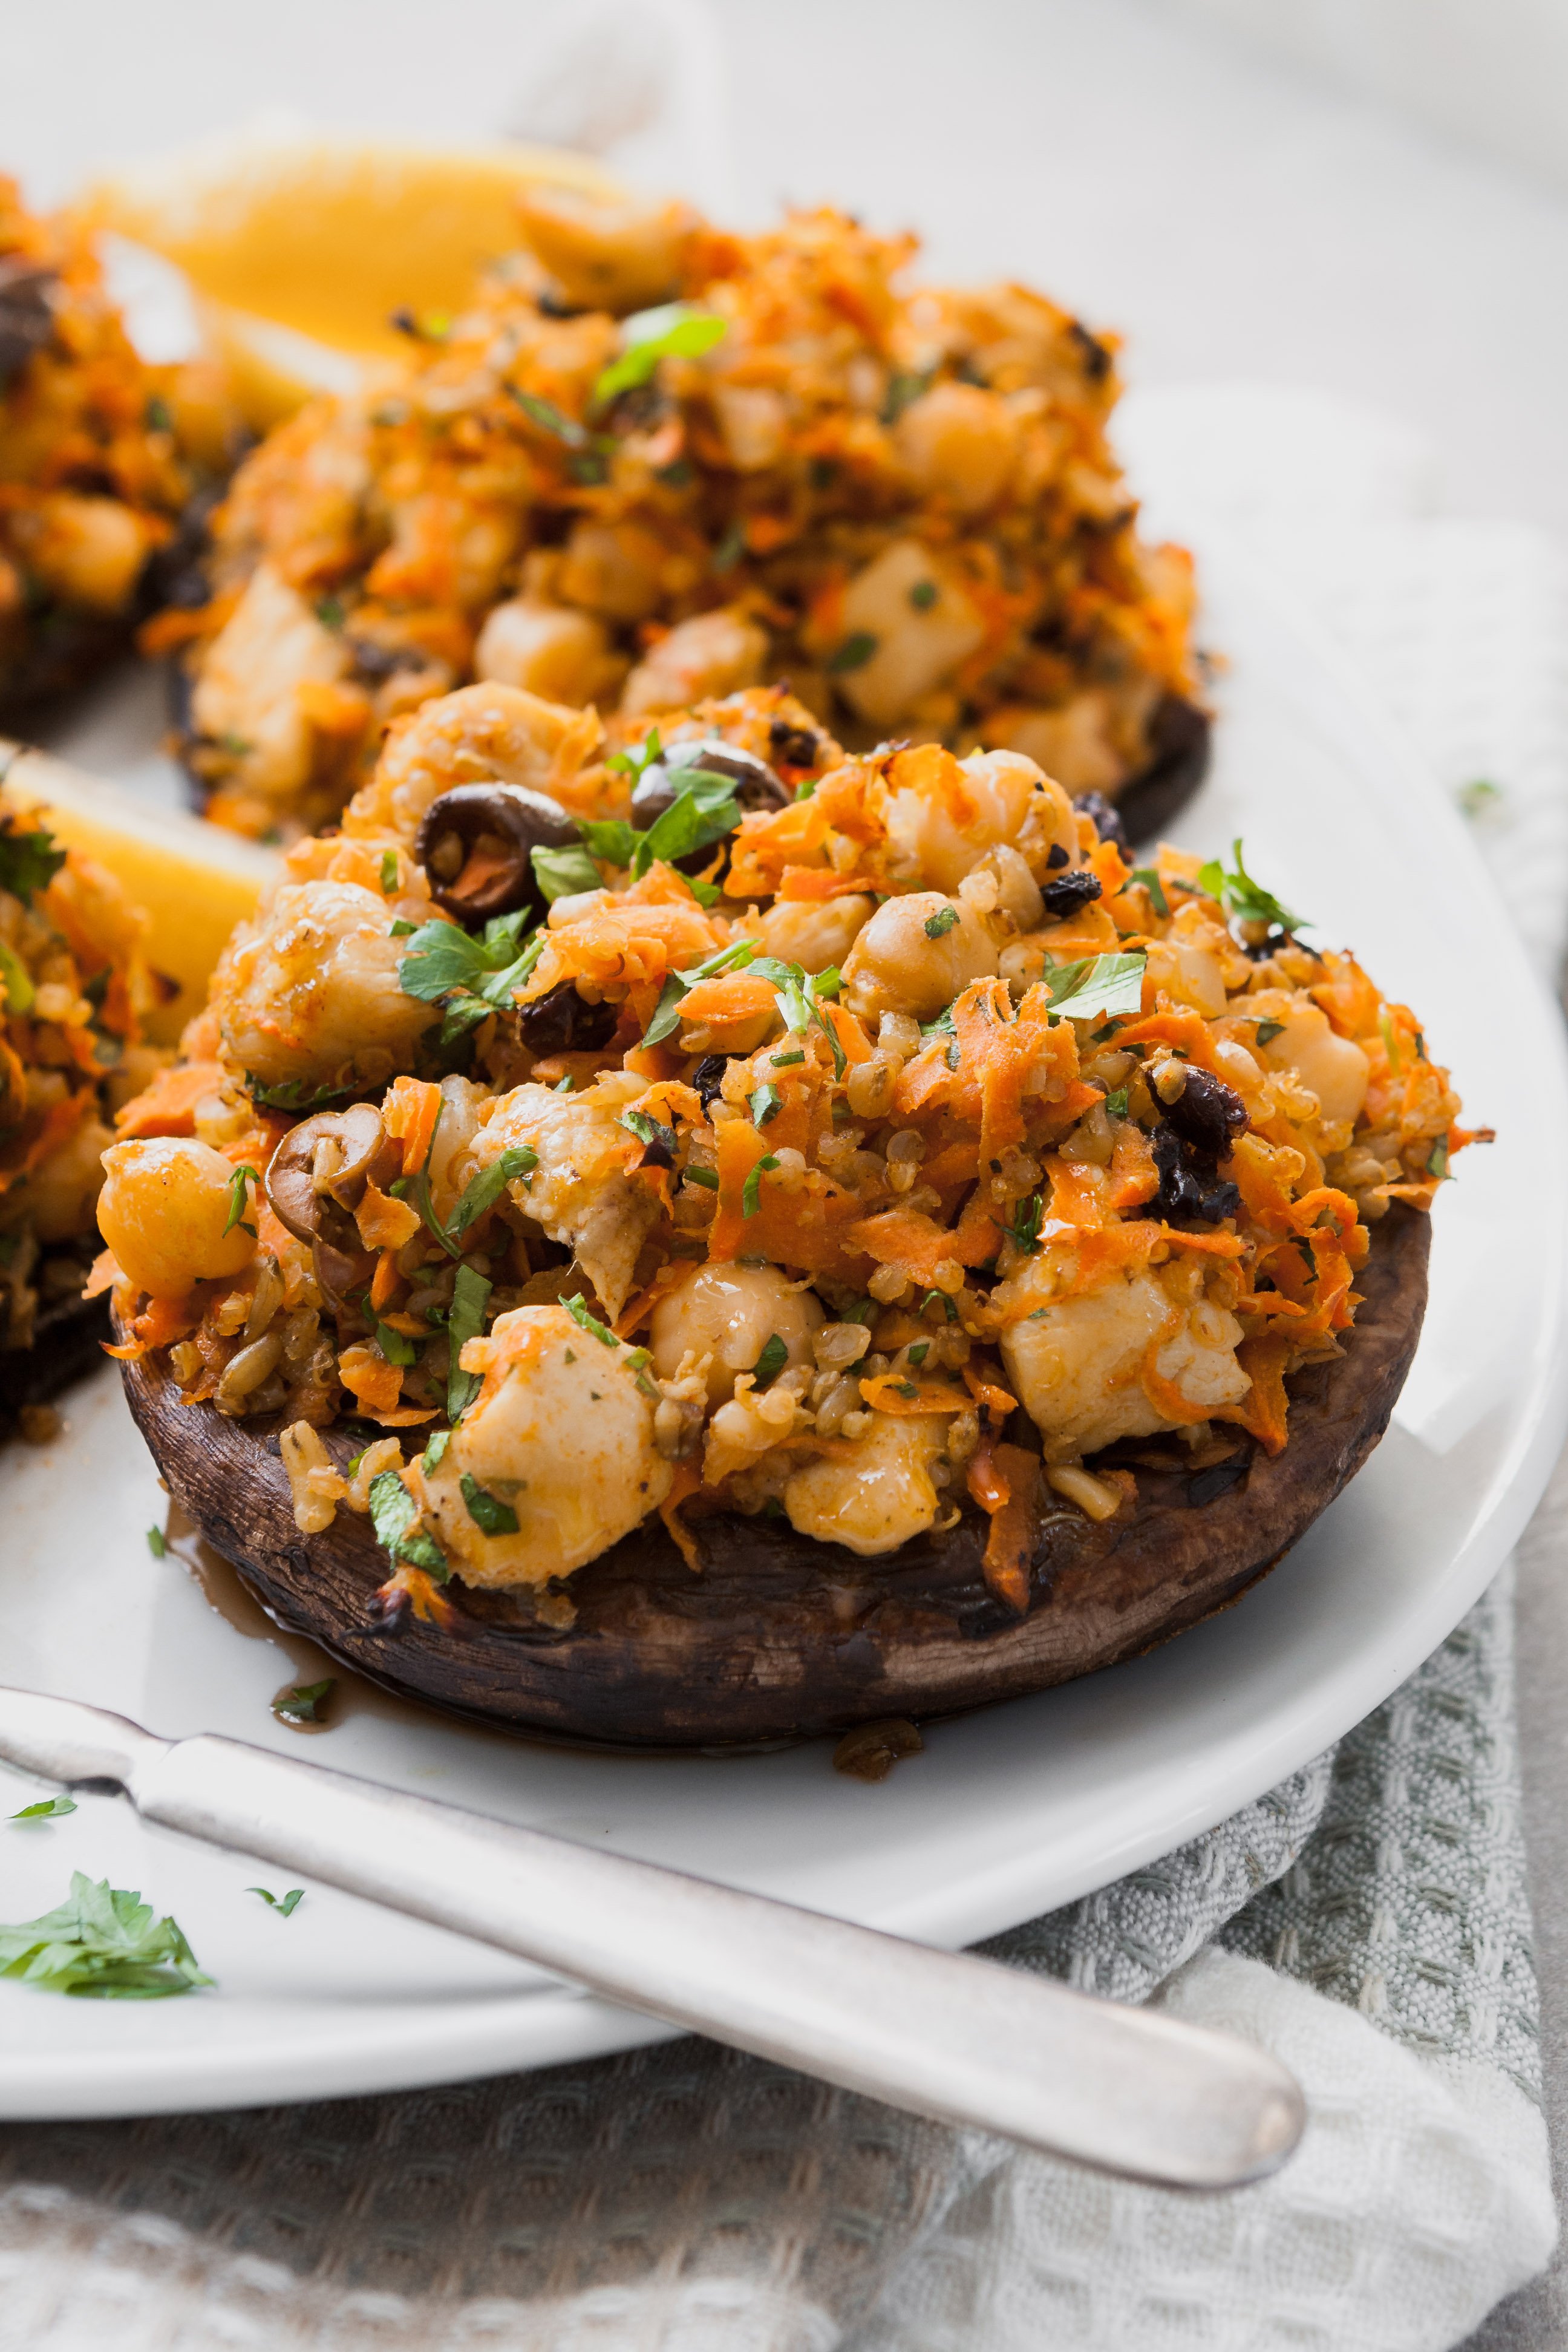 Packed with bold flavors and textures, these Moroccan Stuffed Portobellos with carrots, chickpeas, and ancient grains are not only healthy and satisfying, but easy to make and come together in under an hour! | from Lauren Grant of Zestful Kitchen